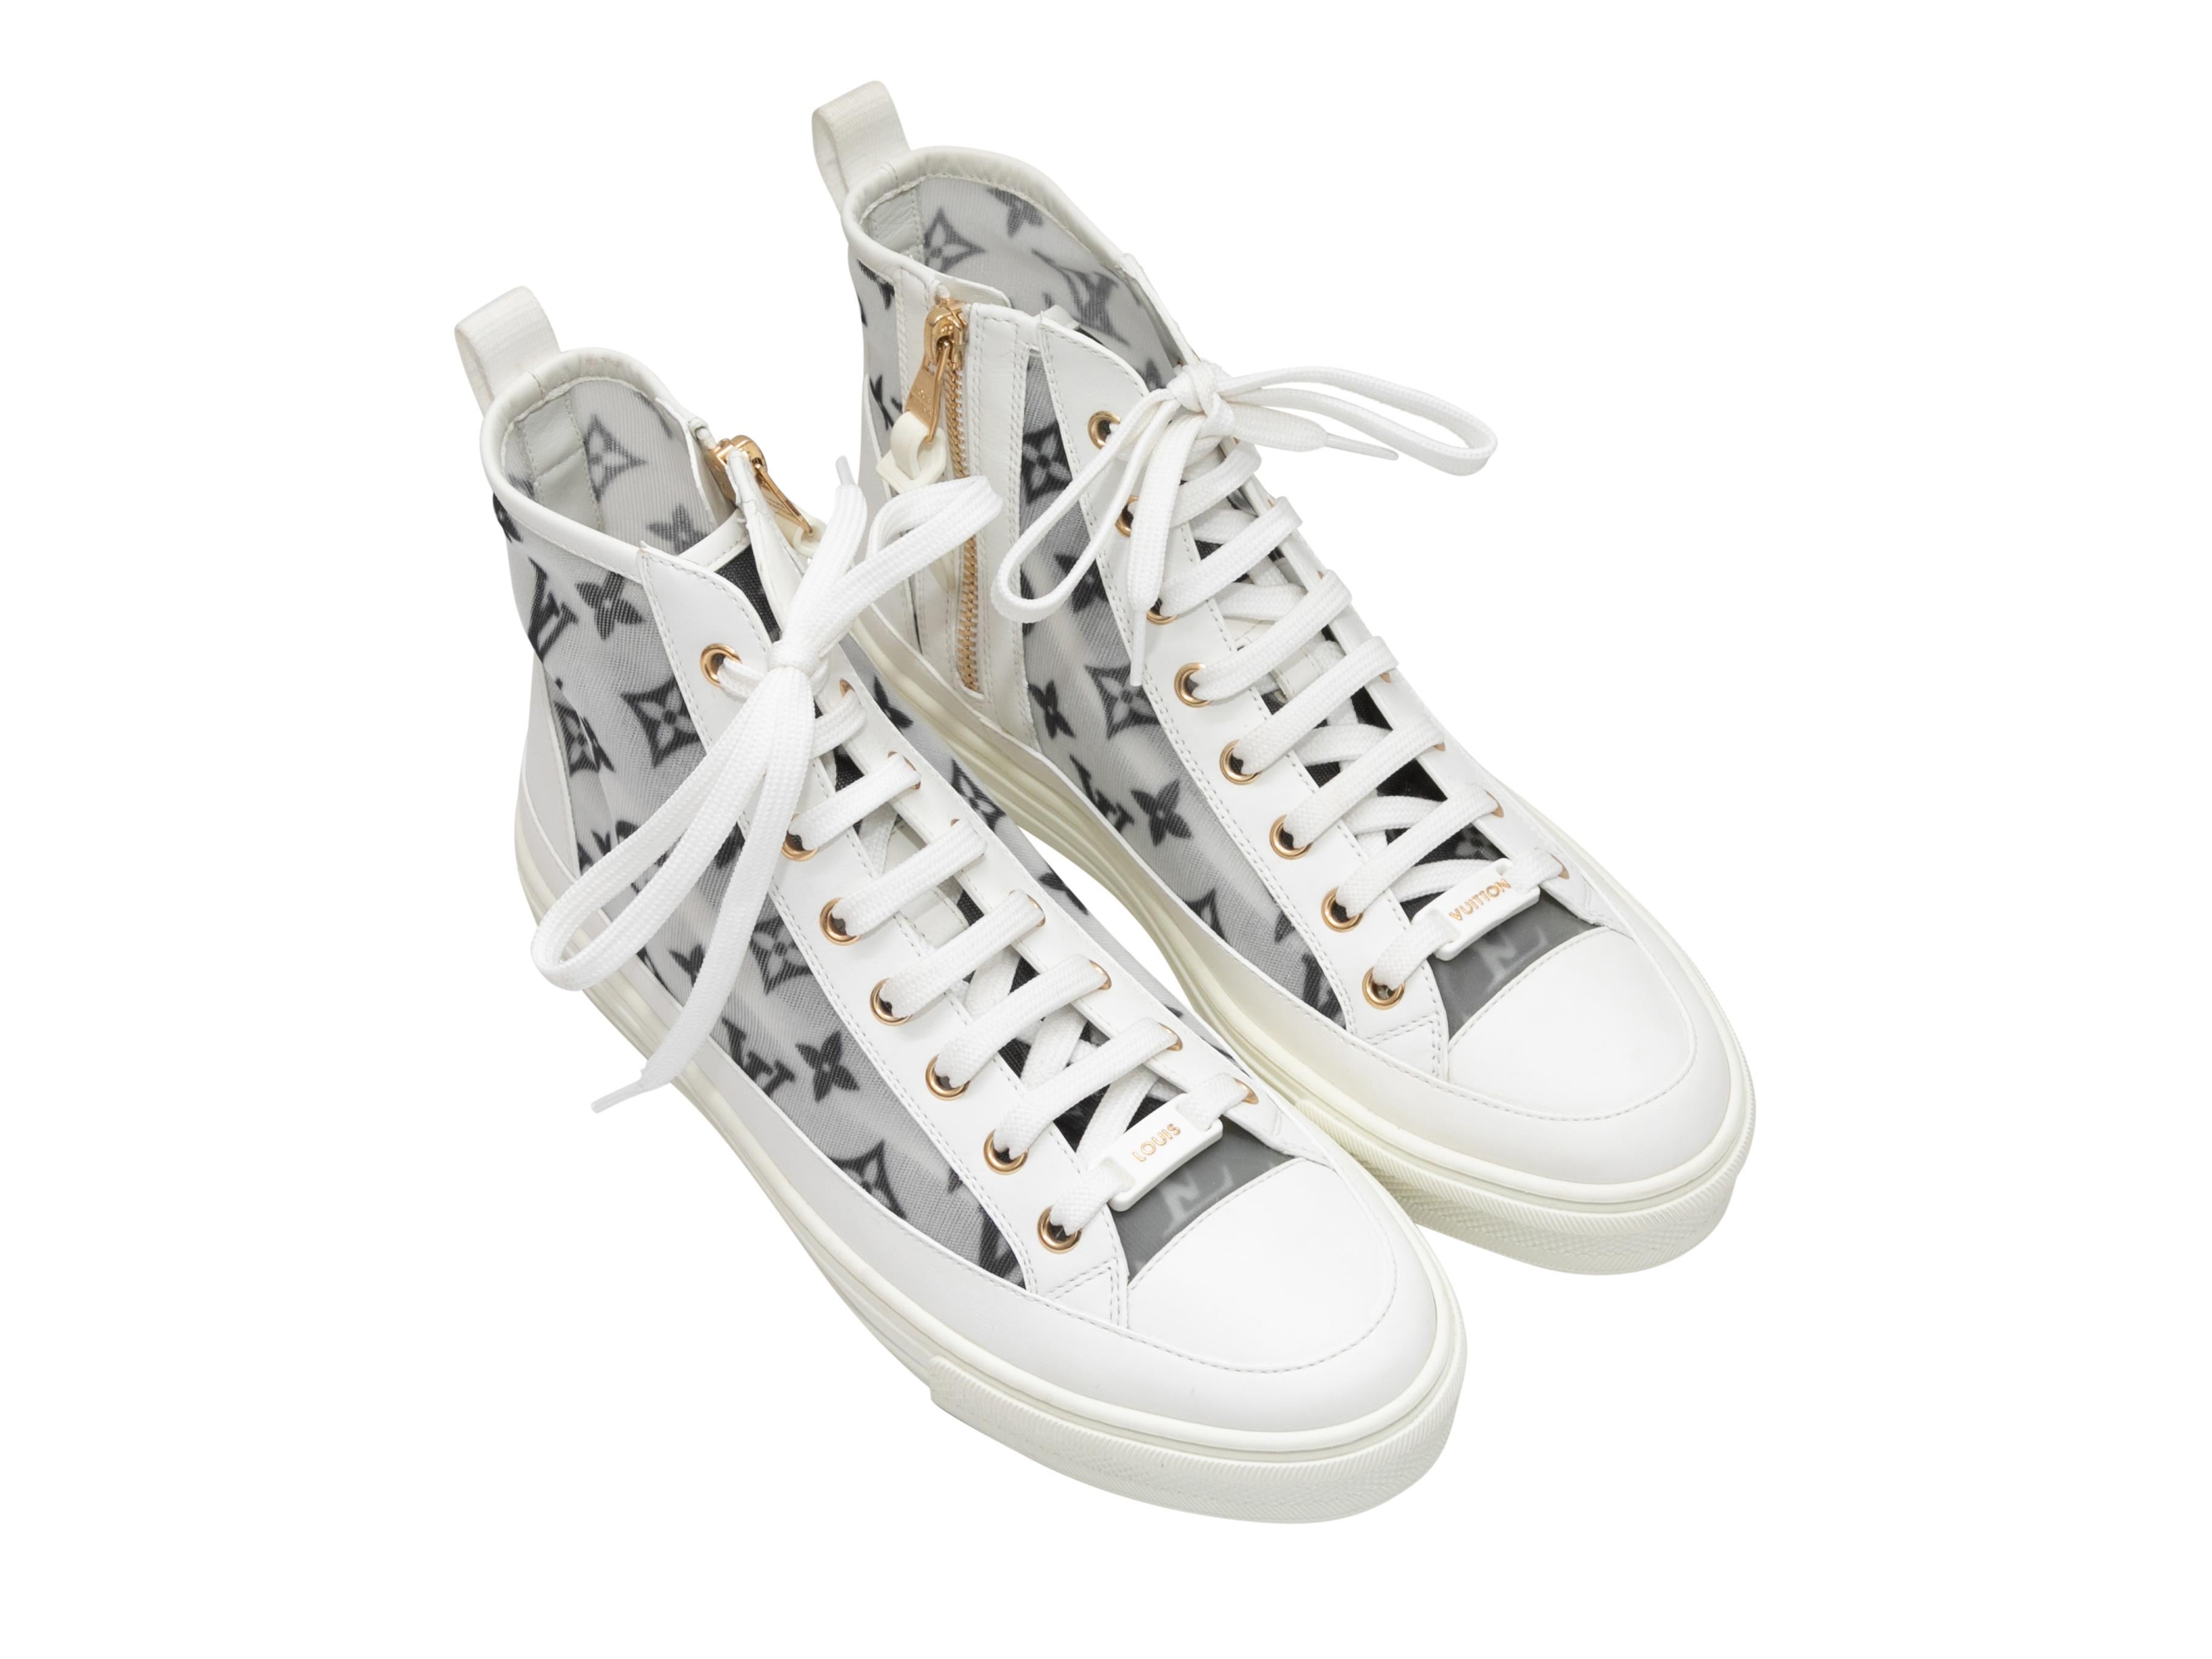 White & Black Louis Vuitton Monogram High-Top Sneakers Size 38 In Good Condition For Sale In New York, NY